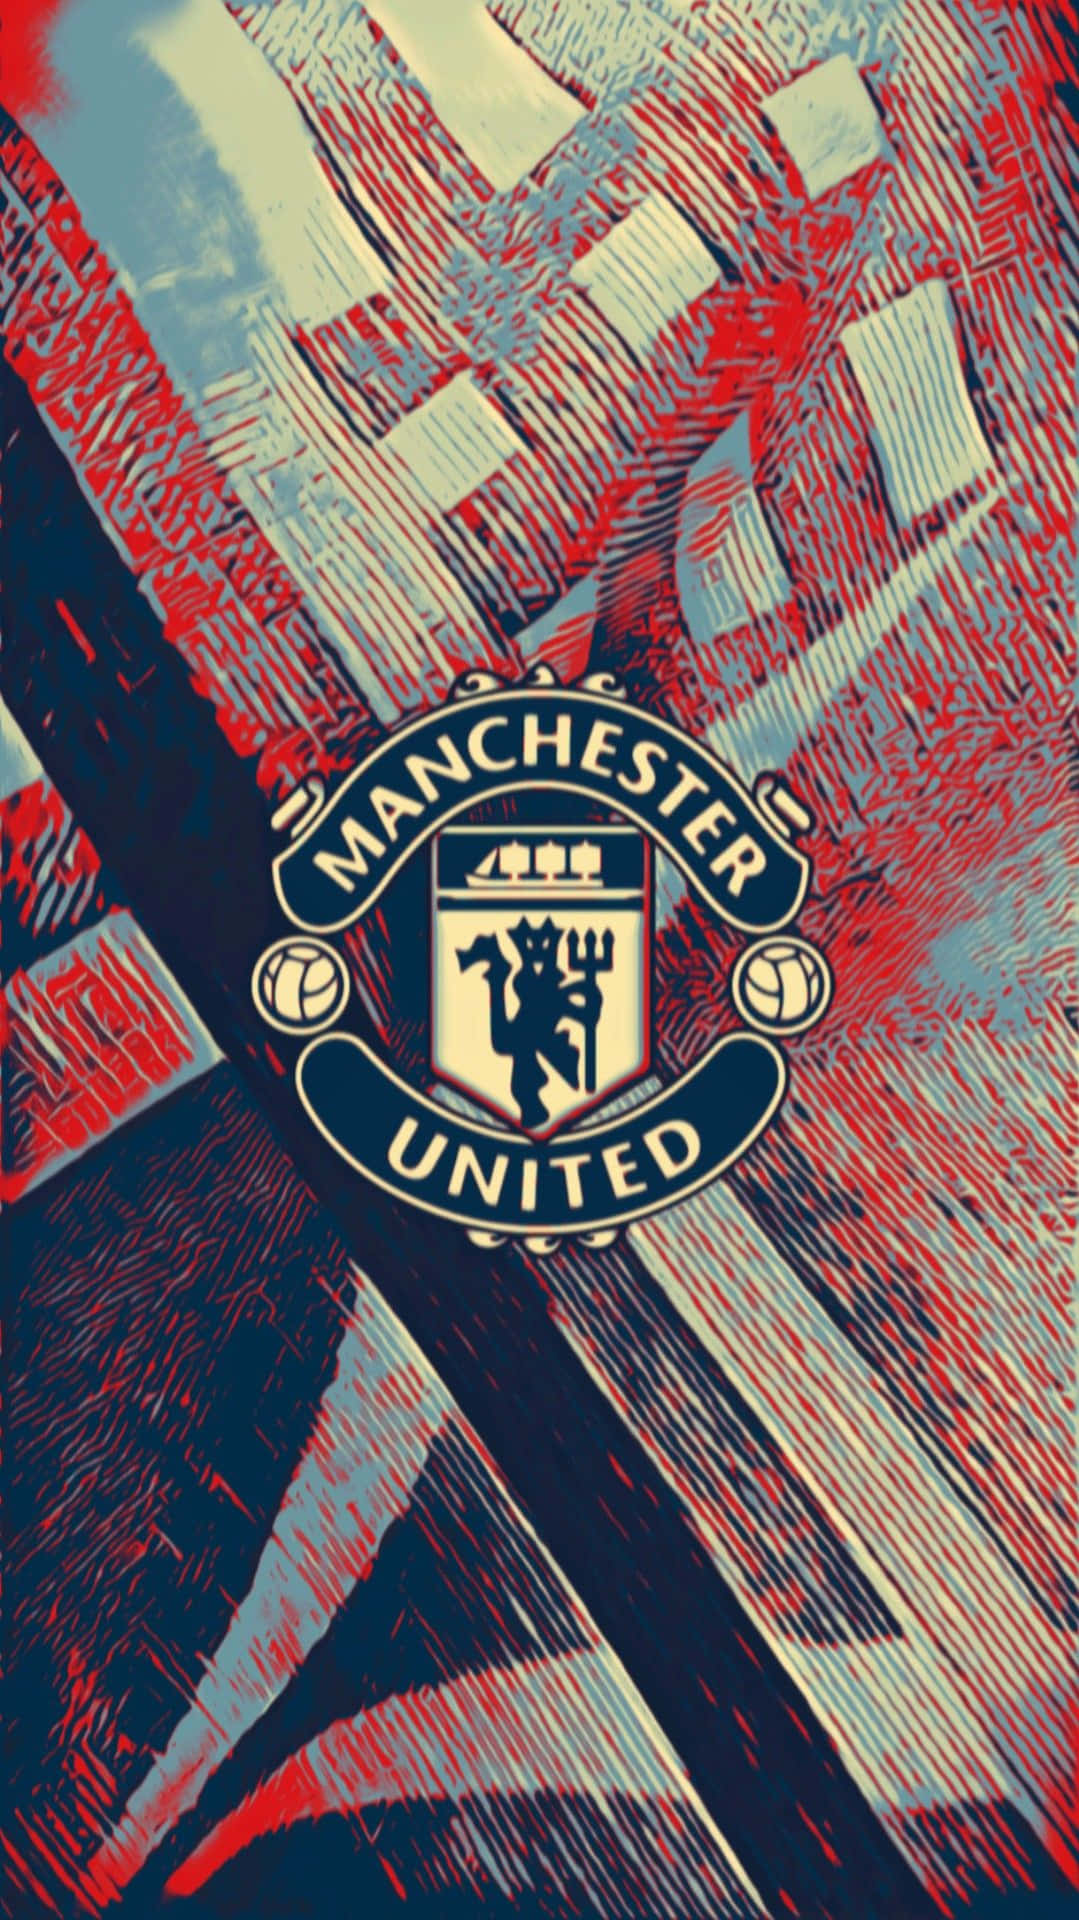 Free Manchester United Iphone Wallpaper Downloads, [100+] Manchester United  Iphone Wallpapers for FREE 